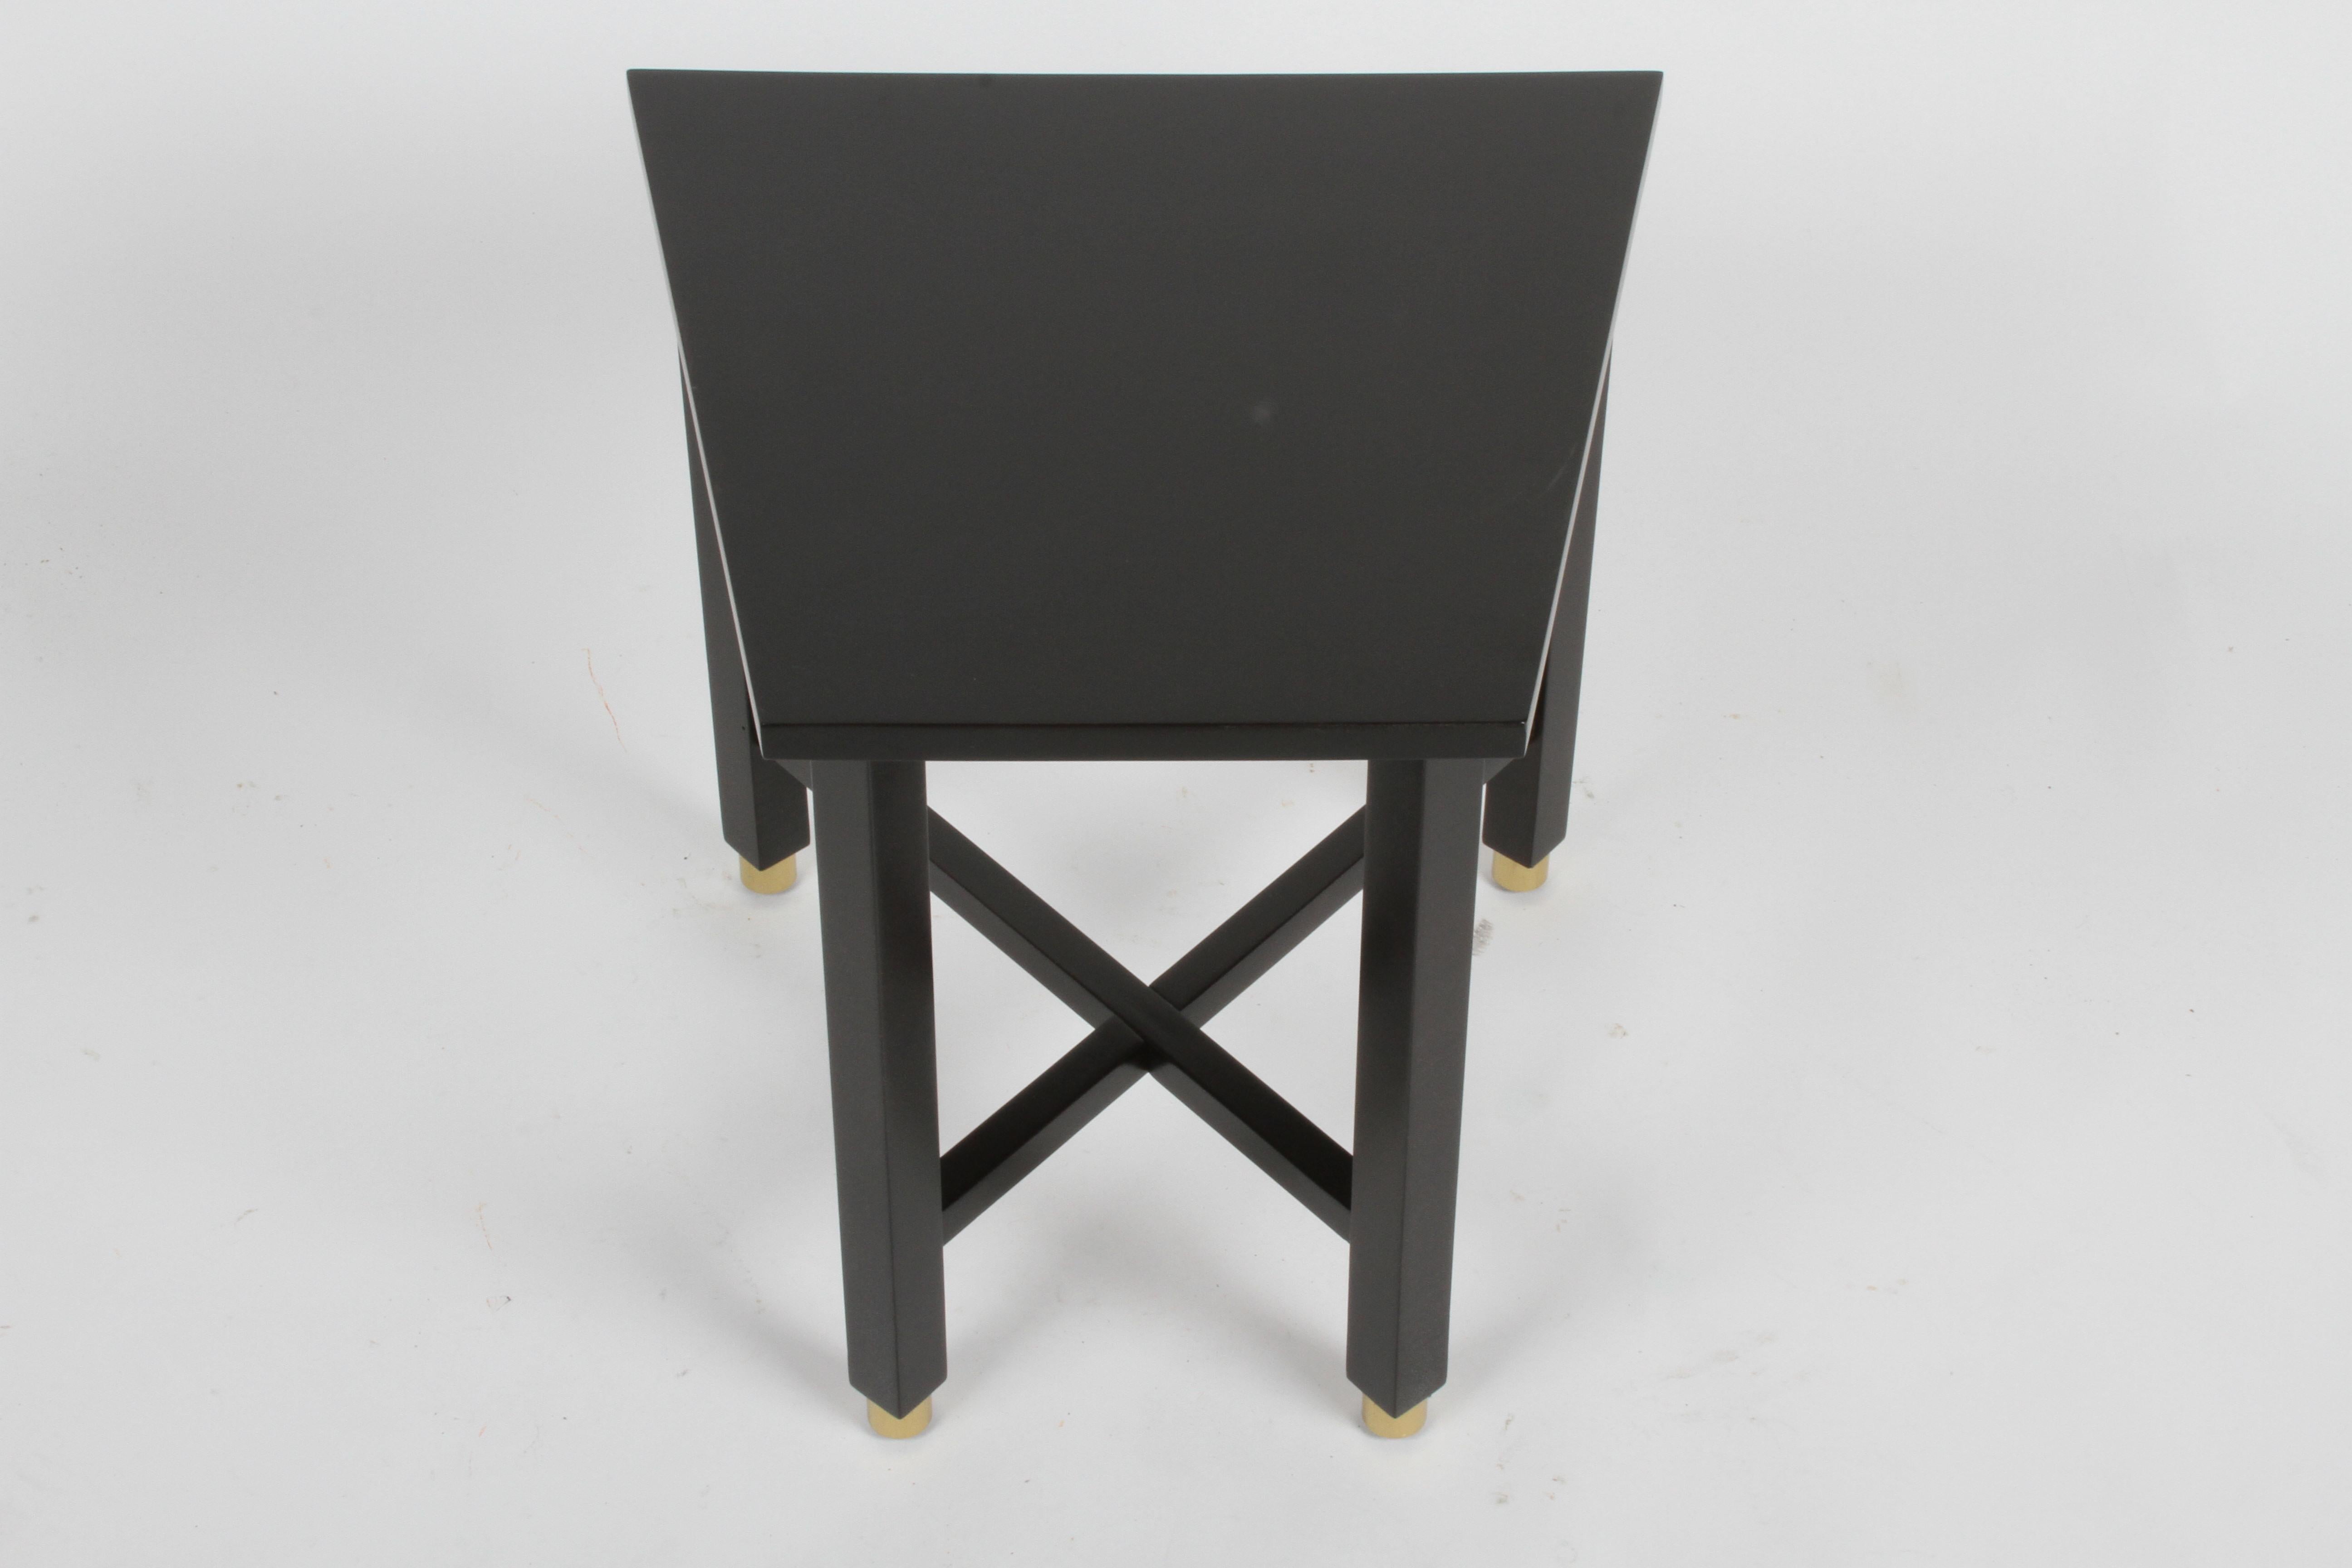 Newly refinished Edward Wormley for Dunbar Mid-Century Modern mahogany wedge or Trapezoidal end, drinks or side table in dark ebony with cross stretchers on round brass sabots. Marked with 